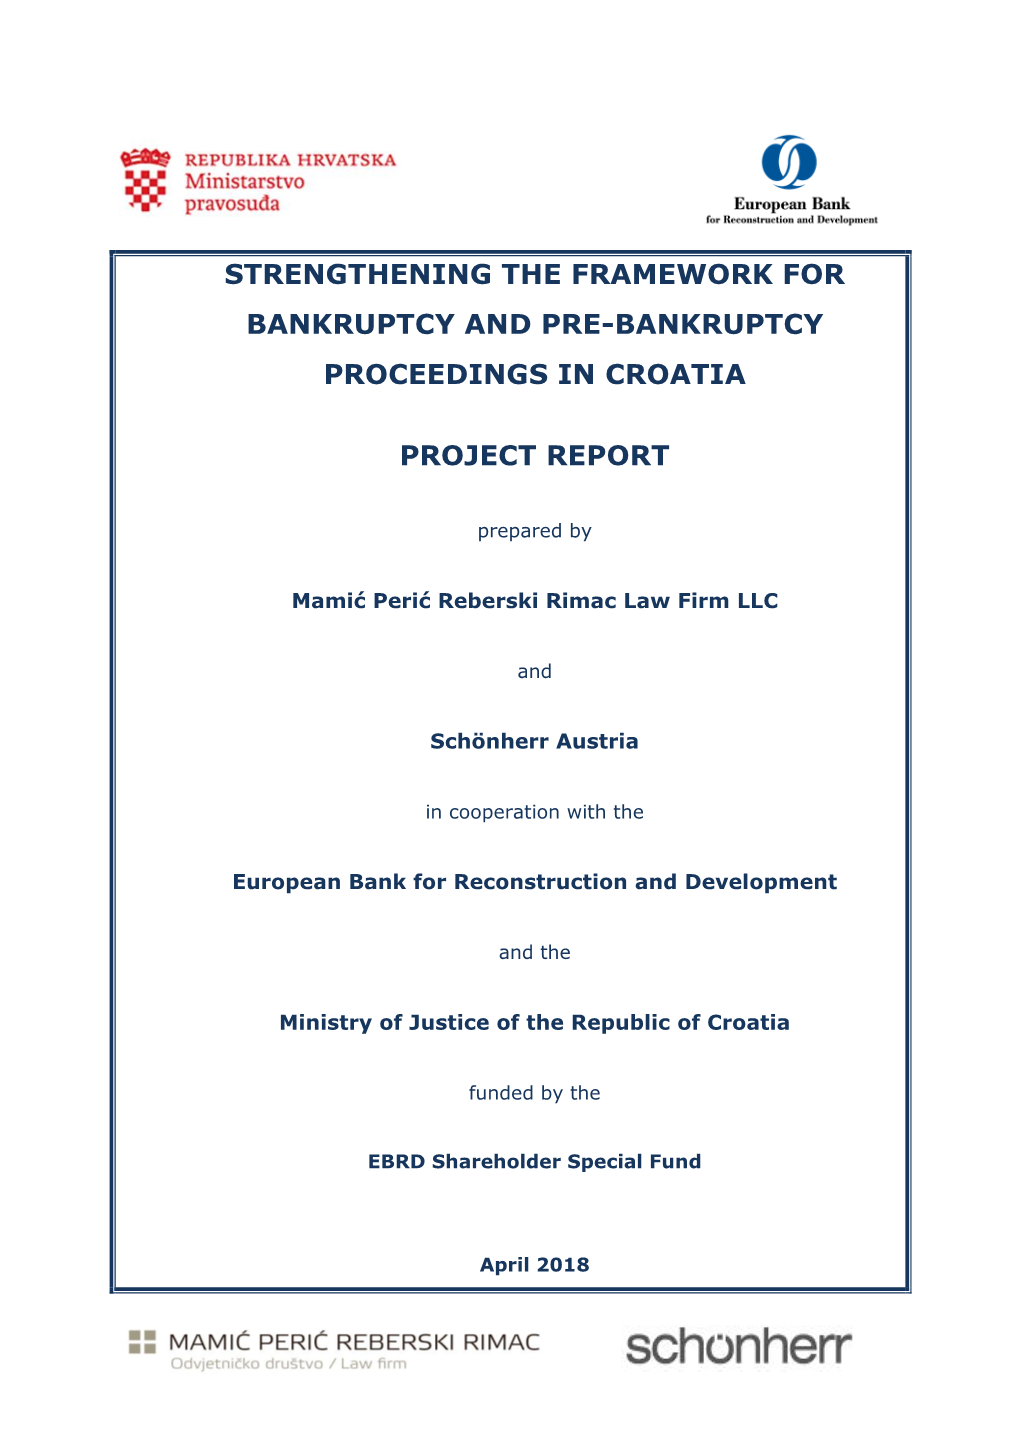 Strengthening the Framework for Bankruptcy and Pre-Bankruptcy Proceedings in Croatia Project Report